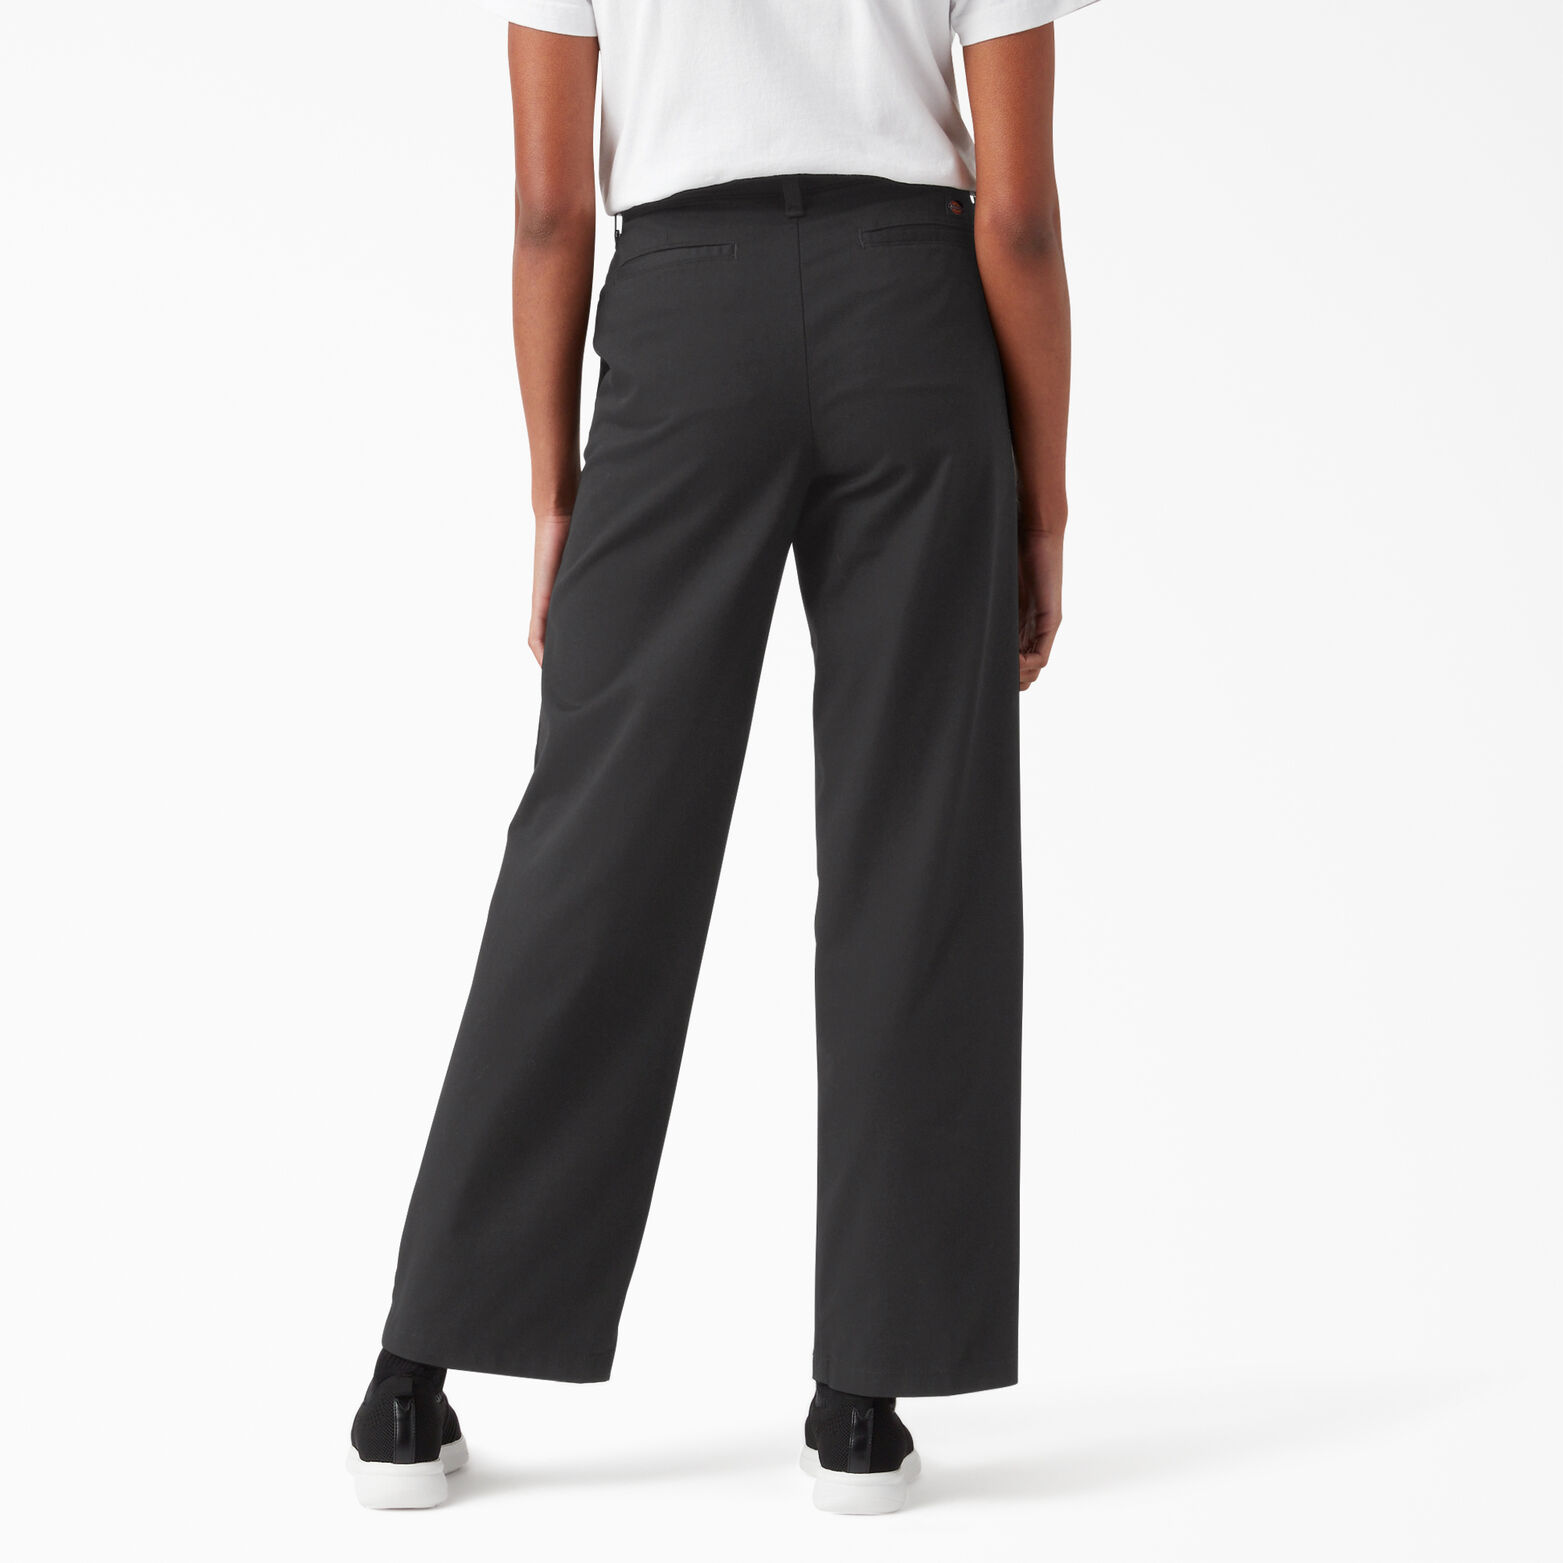 At blød vejkryds Women's Relaxed Fit Wide Leg Pants - Dickies US